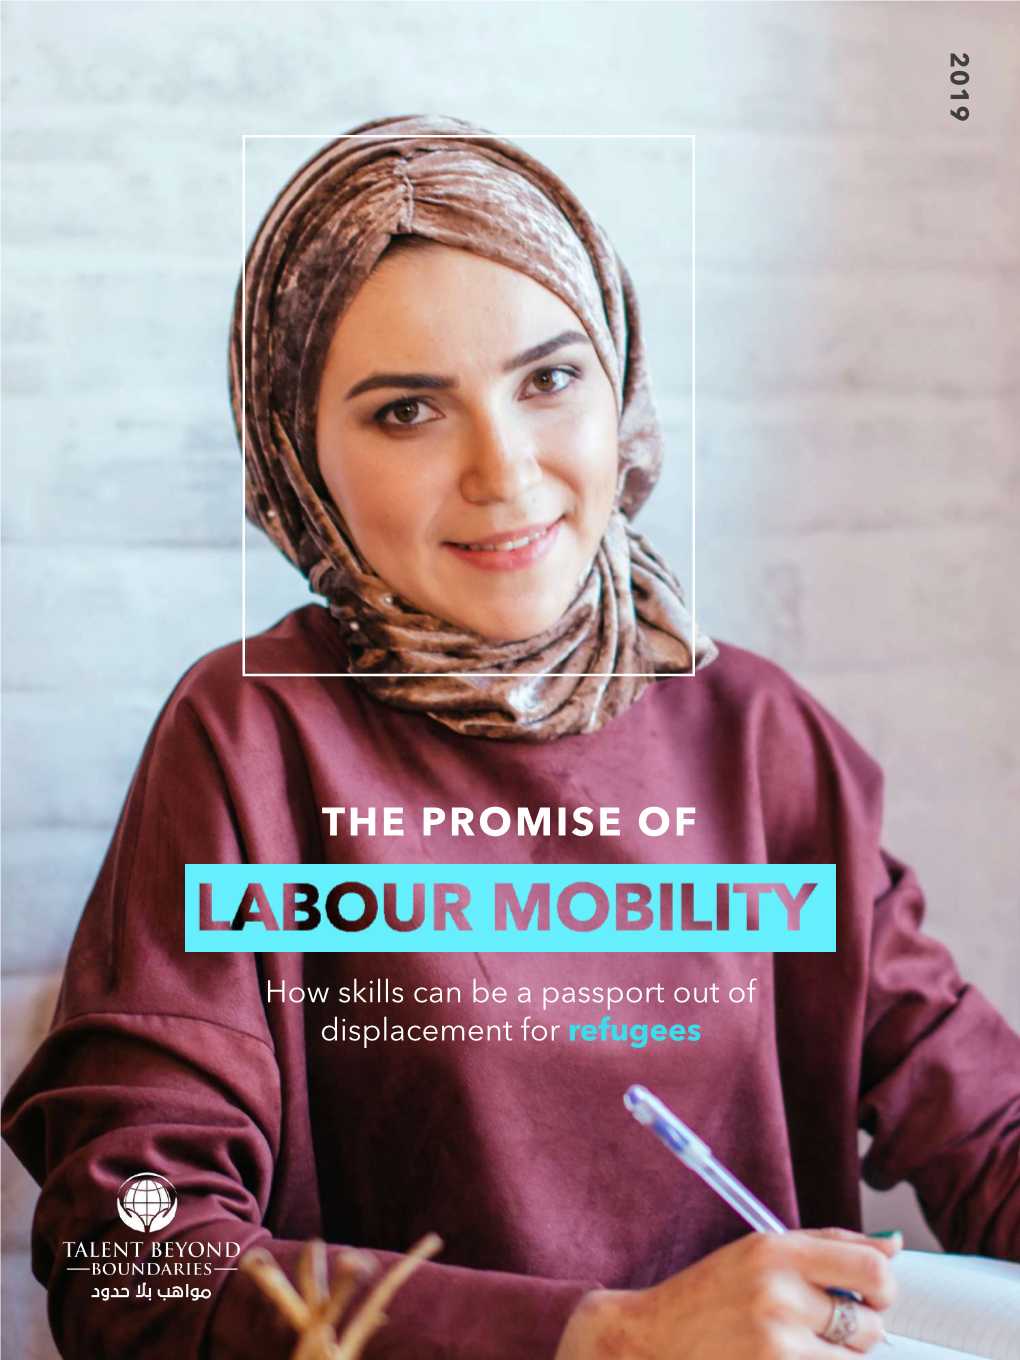 The Promise of Labour Mobility